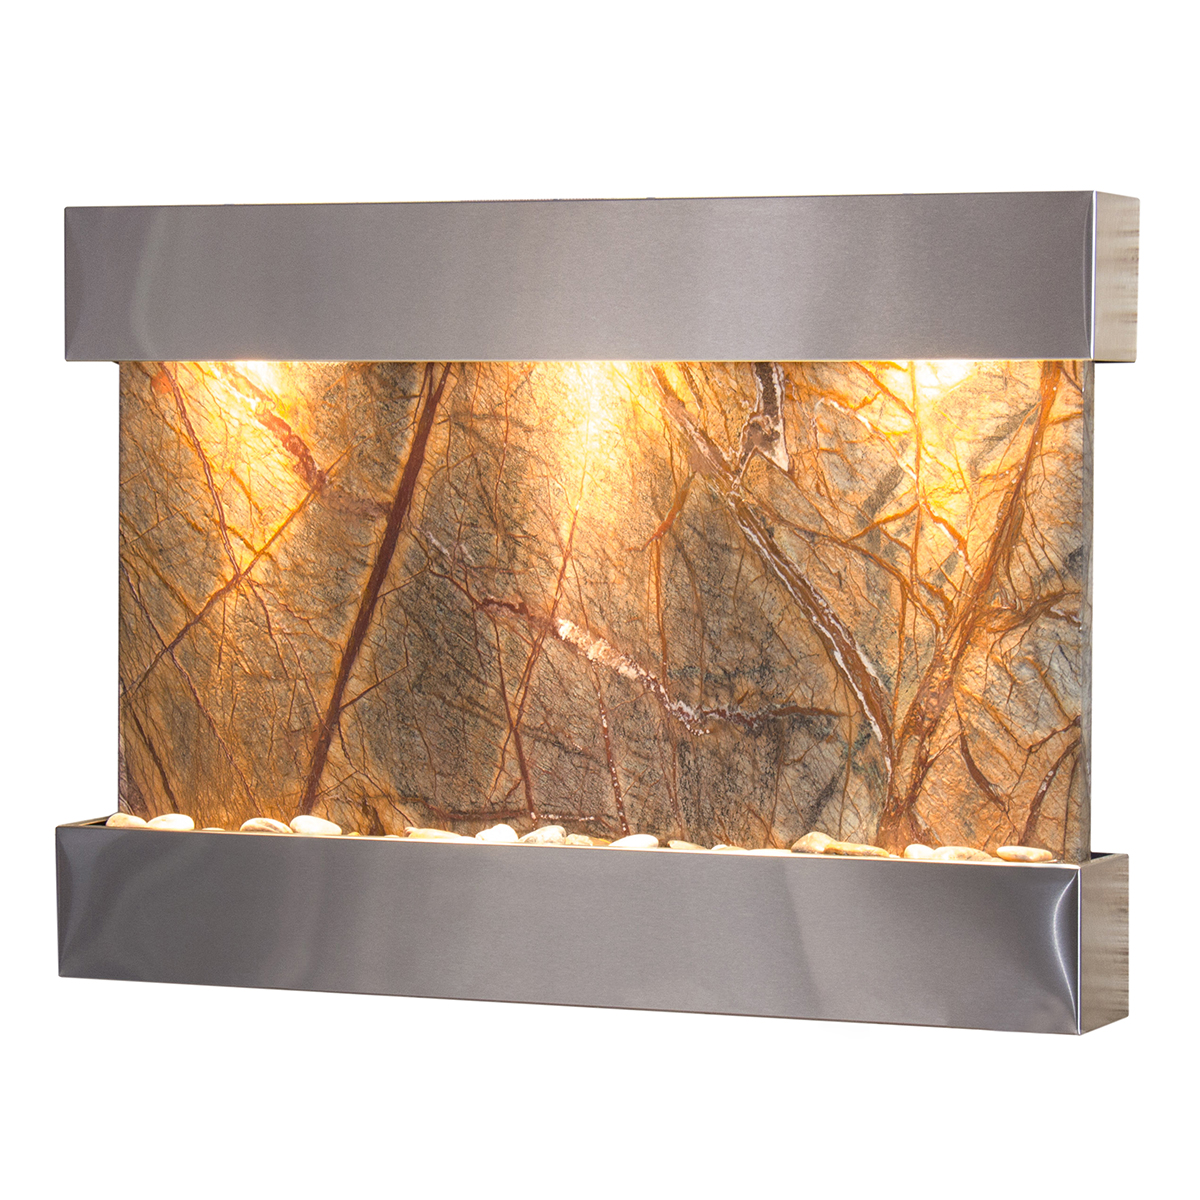 Adagio RCS2006 Reflection Creek Stainless Steel Brown-Marble Wall Fountain - image 2 of 2